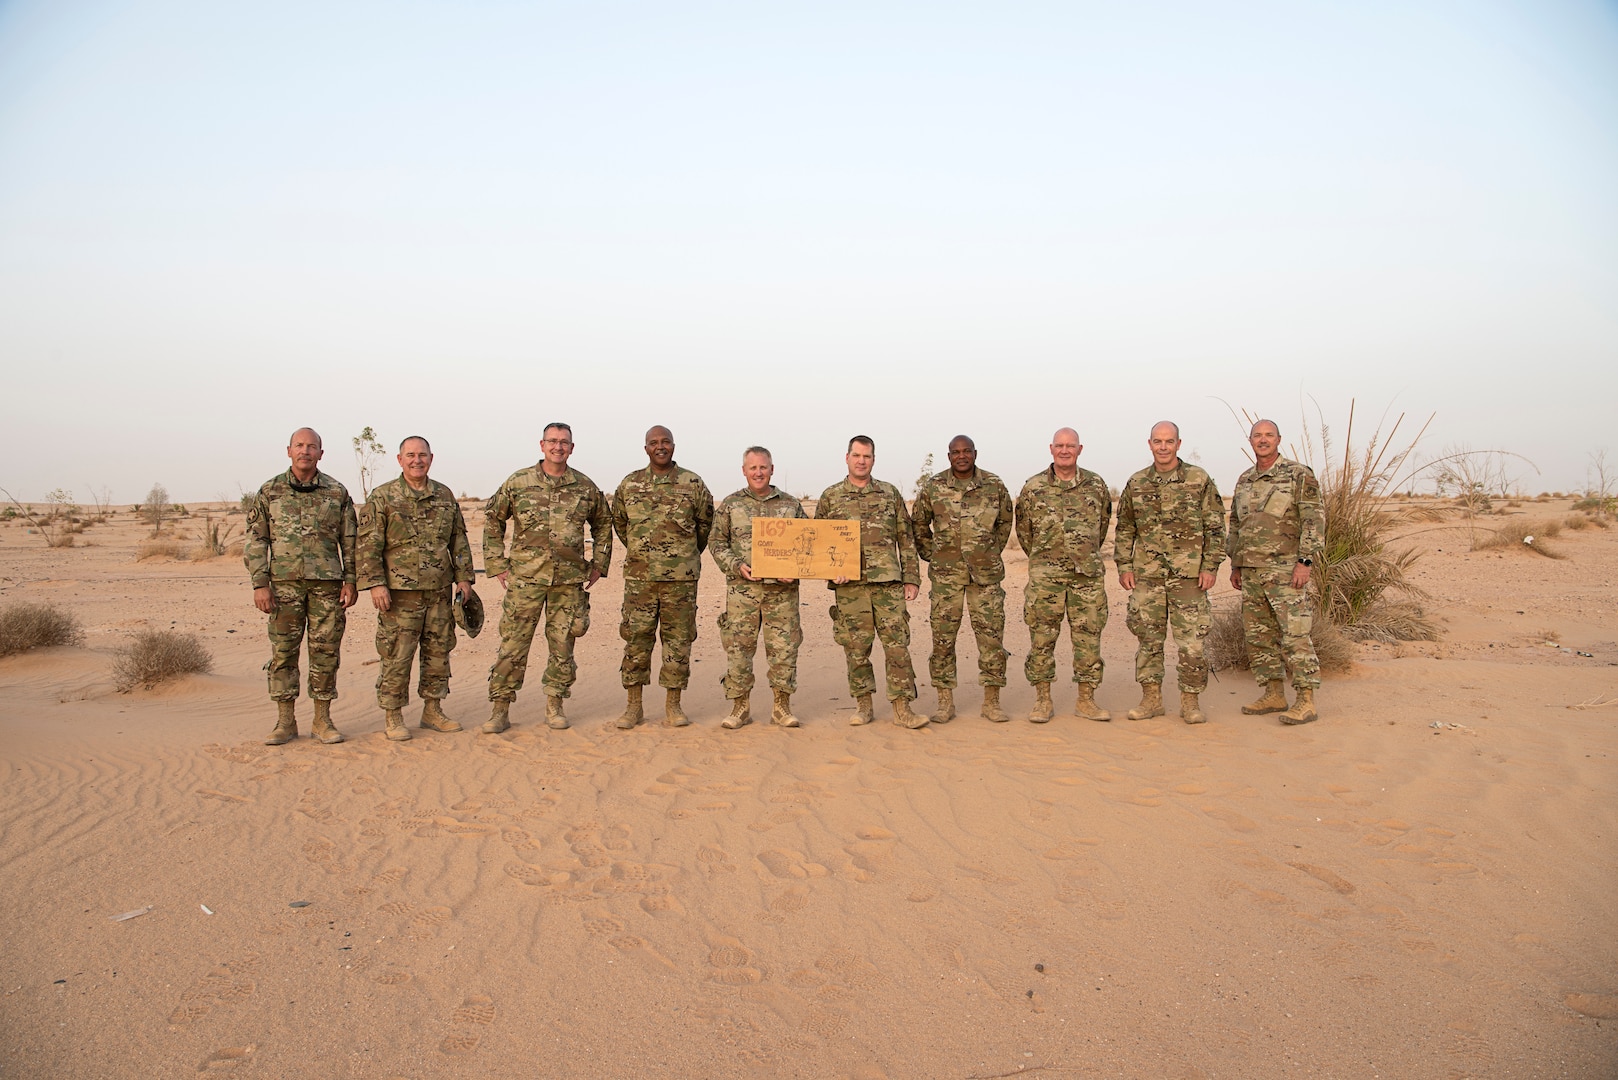 U.S. Air Force Airmen from the 157th Expeditionary Fighter Generation Squadron at the site of the life support area used by coalition forces during Operation Desert Storm in 1991 at Prince Sultan Air Base, Kingdom of Saudi Arabia, June 16, 2021. From left: Chief Master Sgt. Anthony Terry, Senior Master Sgt. Mark Tanner, Chief Master Sgt. Charles Bowen, Master Sgt. Charles Randle, Senior Master Sgt. Charles Talbert, Senior Master Sgt. Martin Gladden, Master Sgt. Robert Woodard, Senior Master Sgt. Burman Jones, Senior Master Sgt. Jeffrey Orr, Senior Master Sgt. Michael Puck.